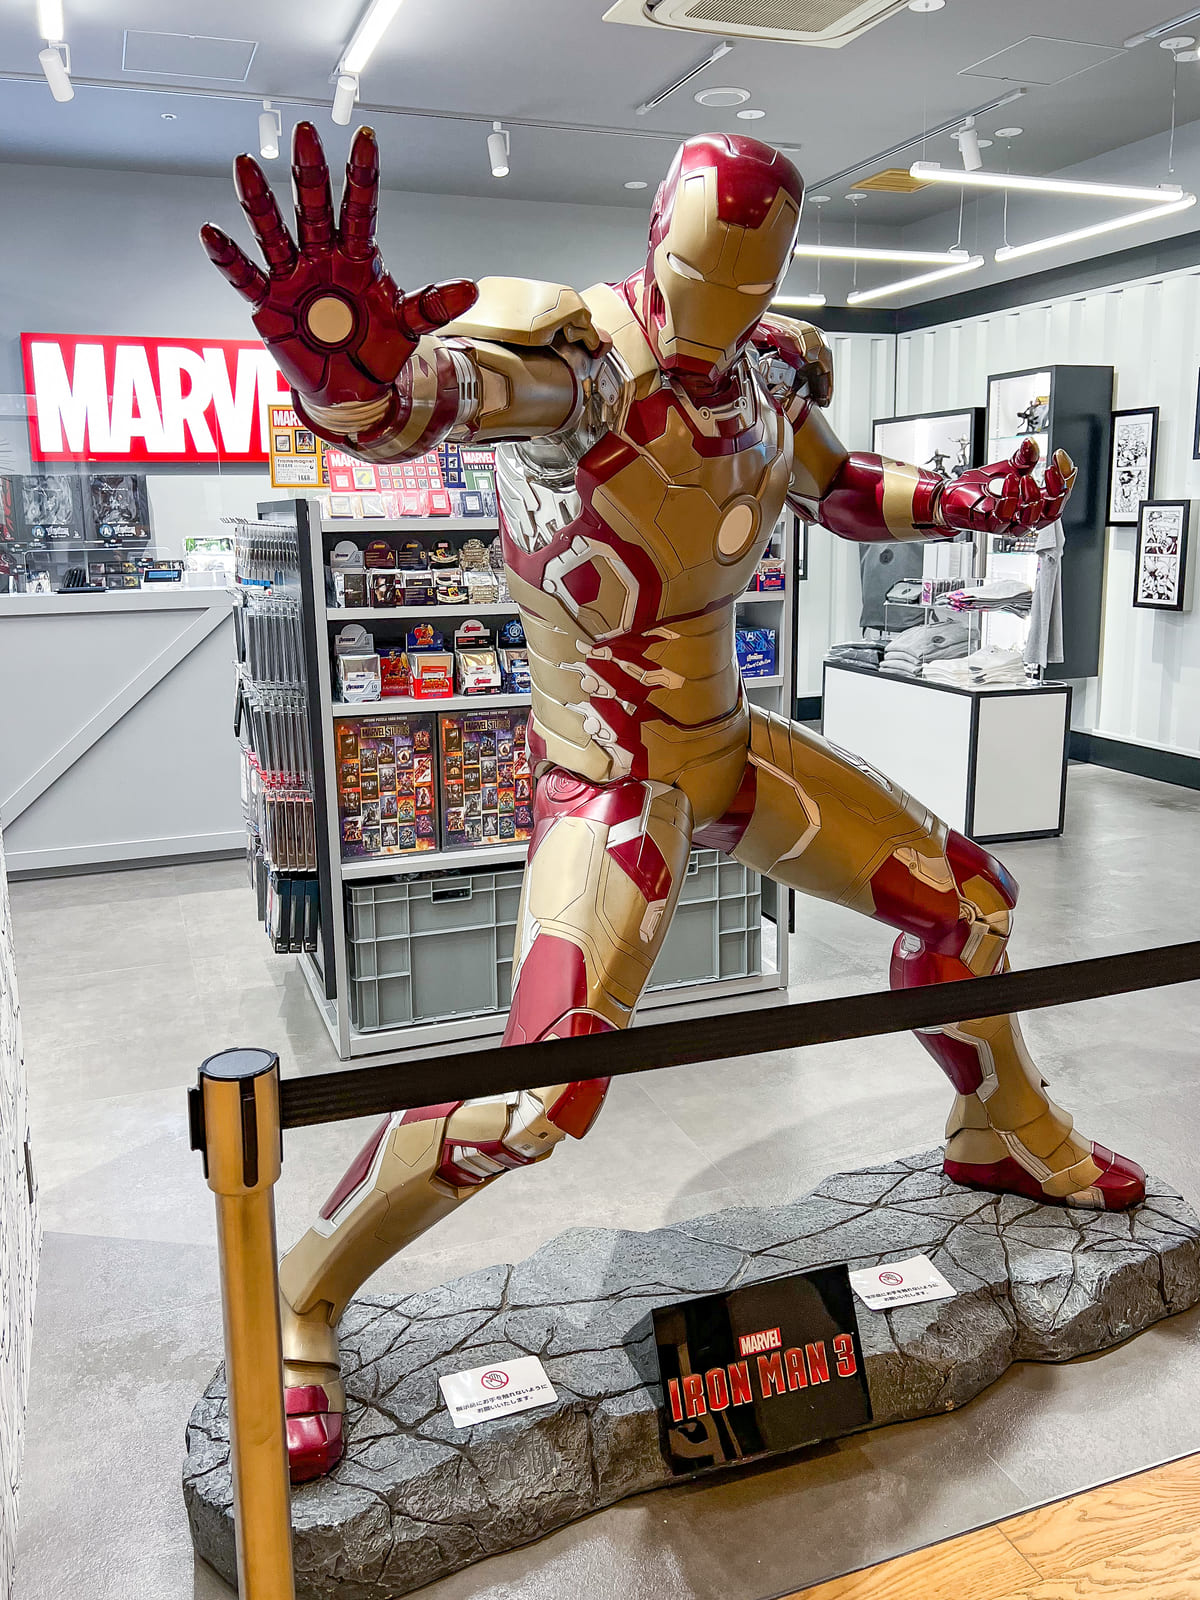 MARVEL STORE by SMALL PLANET 東京ソラマチ店3